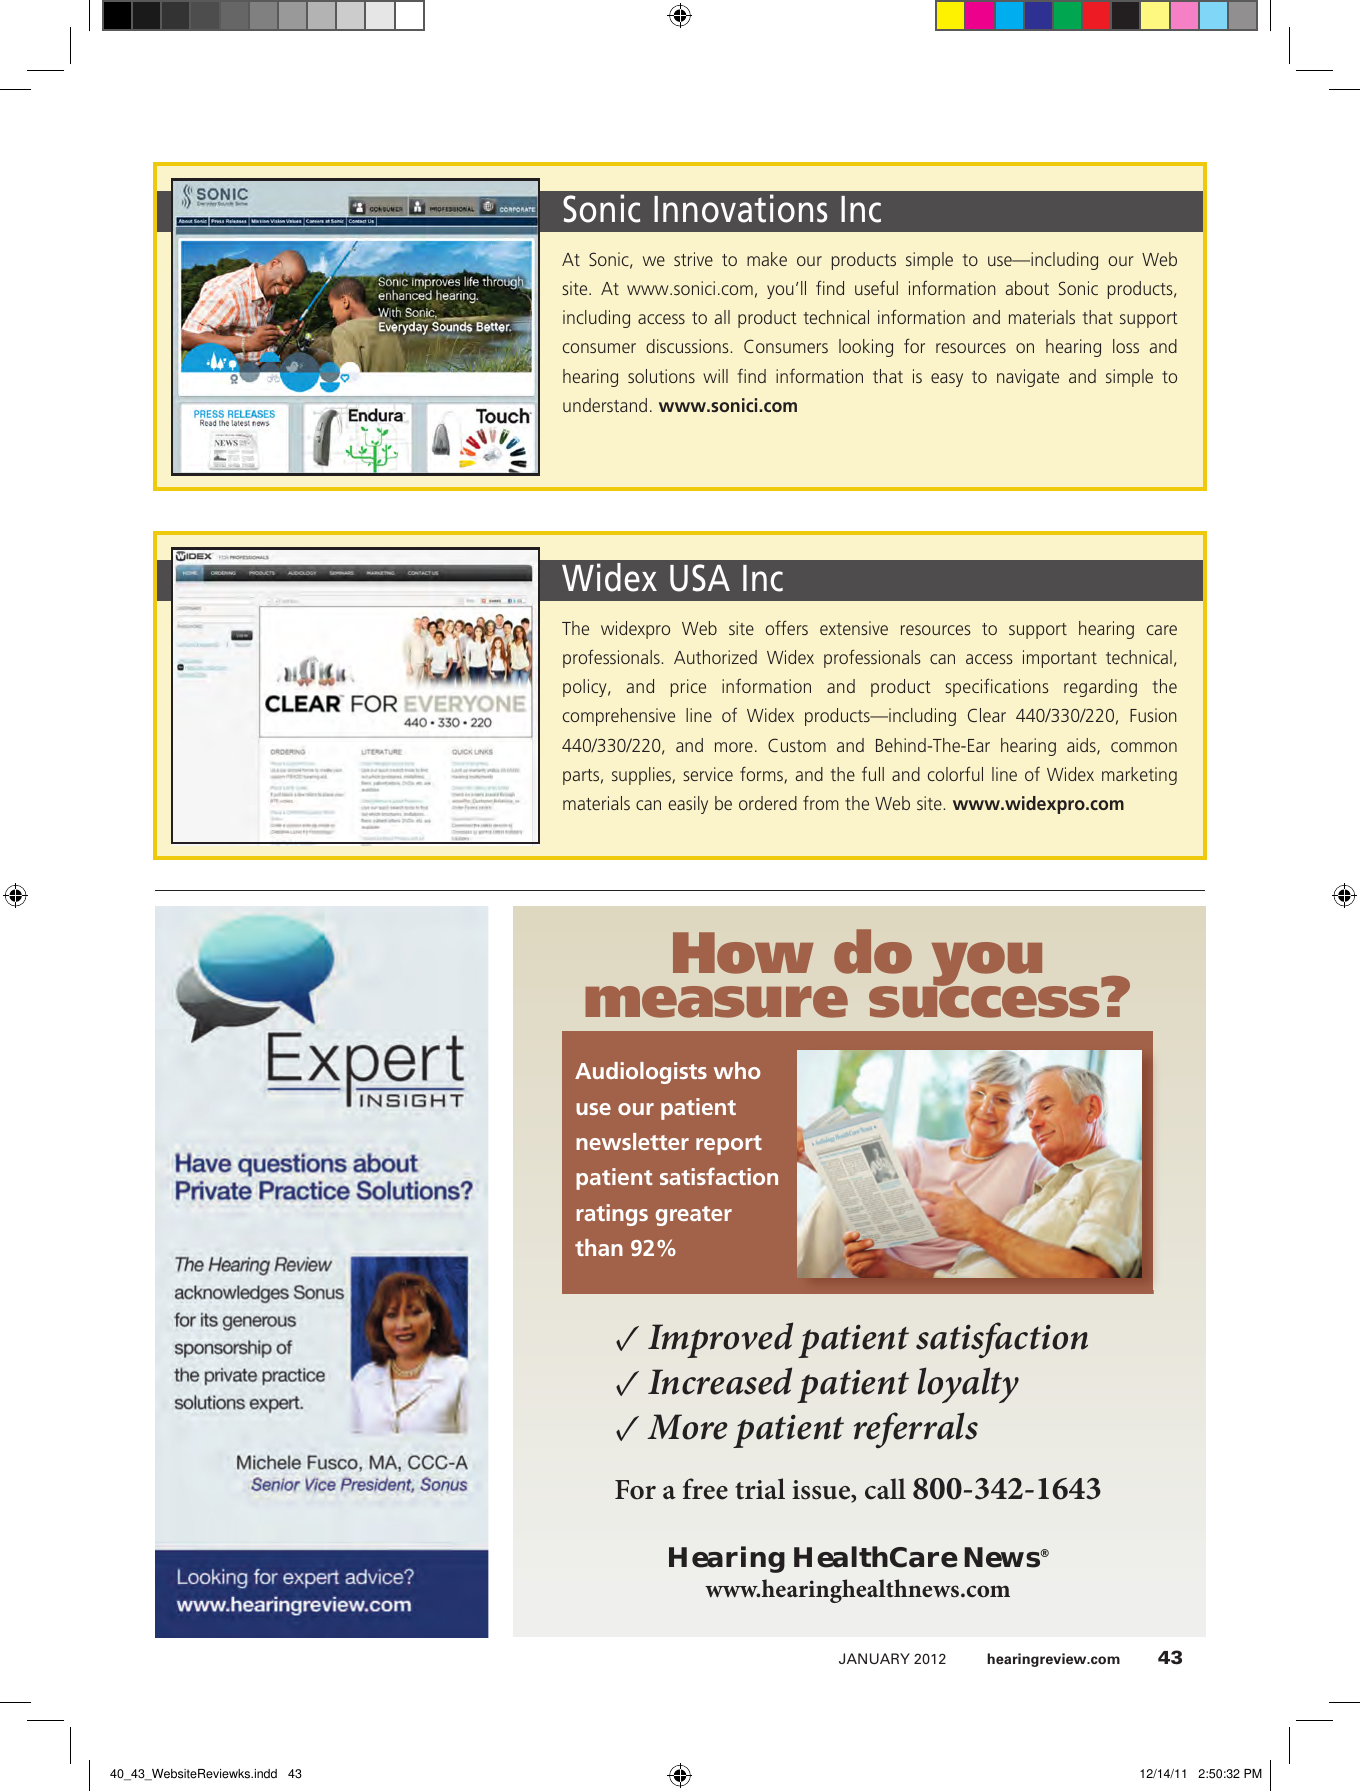 Page 4 of 4 - HR Website Review-2012